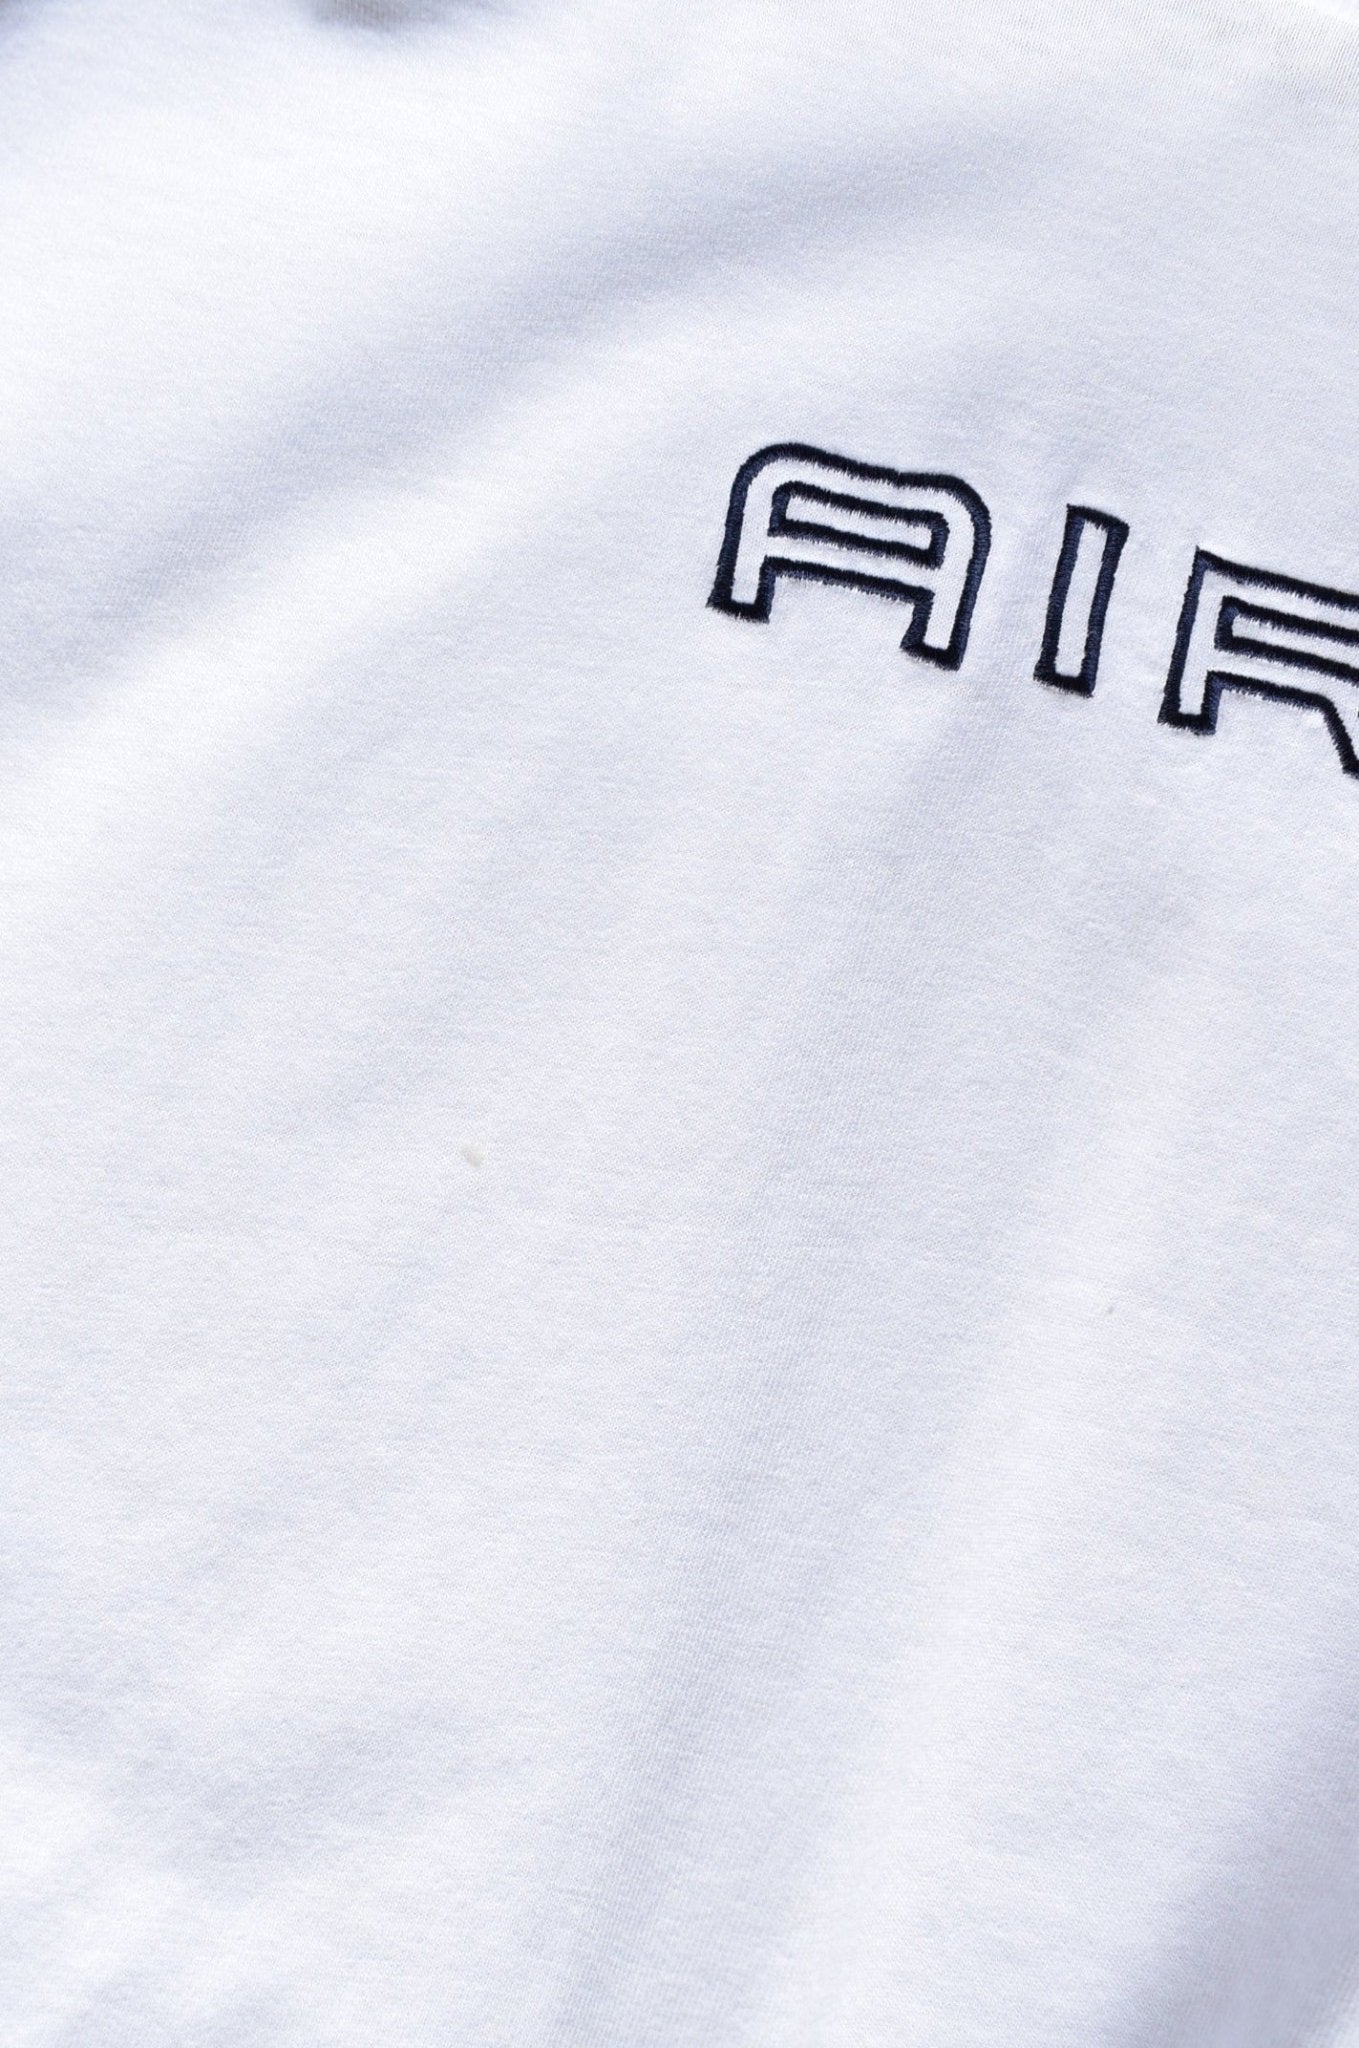 Vintage Nike Air Embroidered Long Sleeve Tee (L) - Retrospective Store